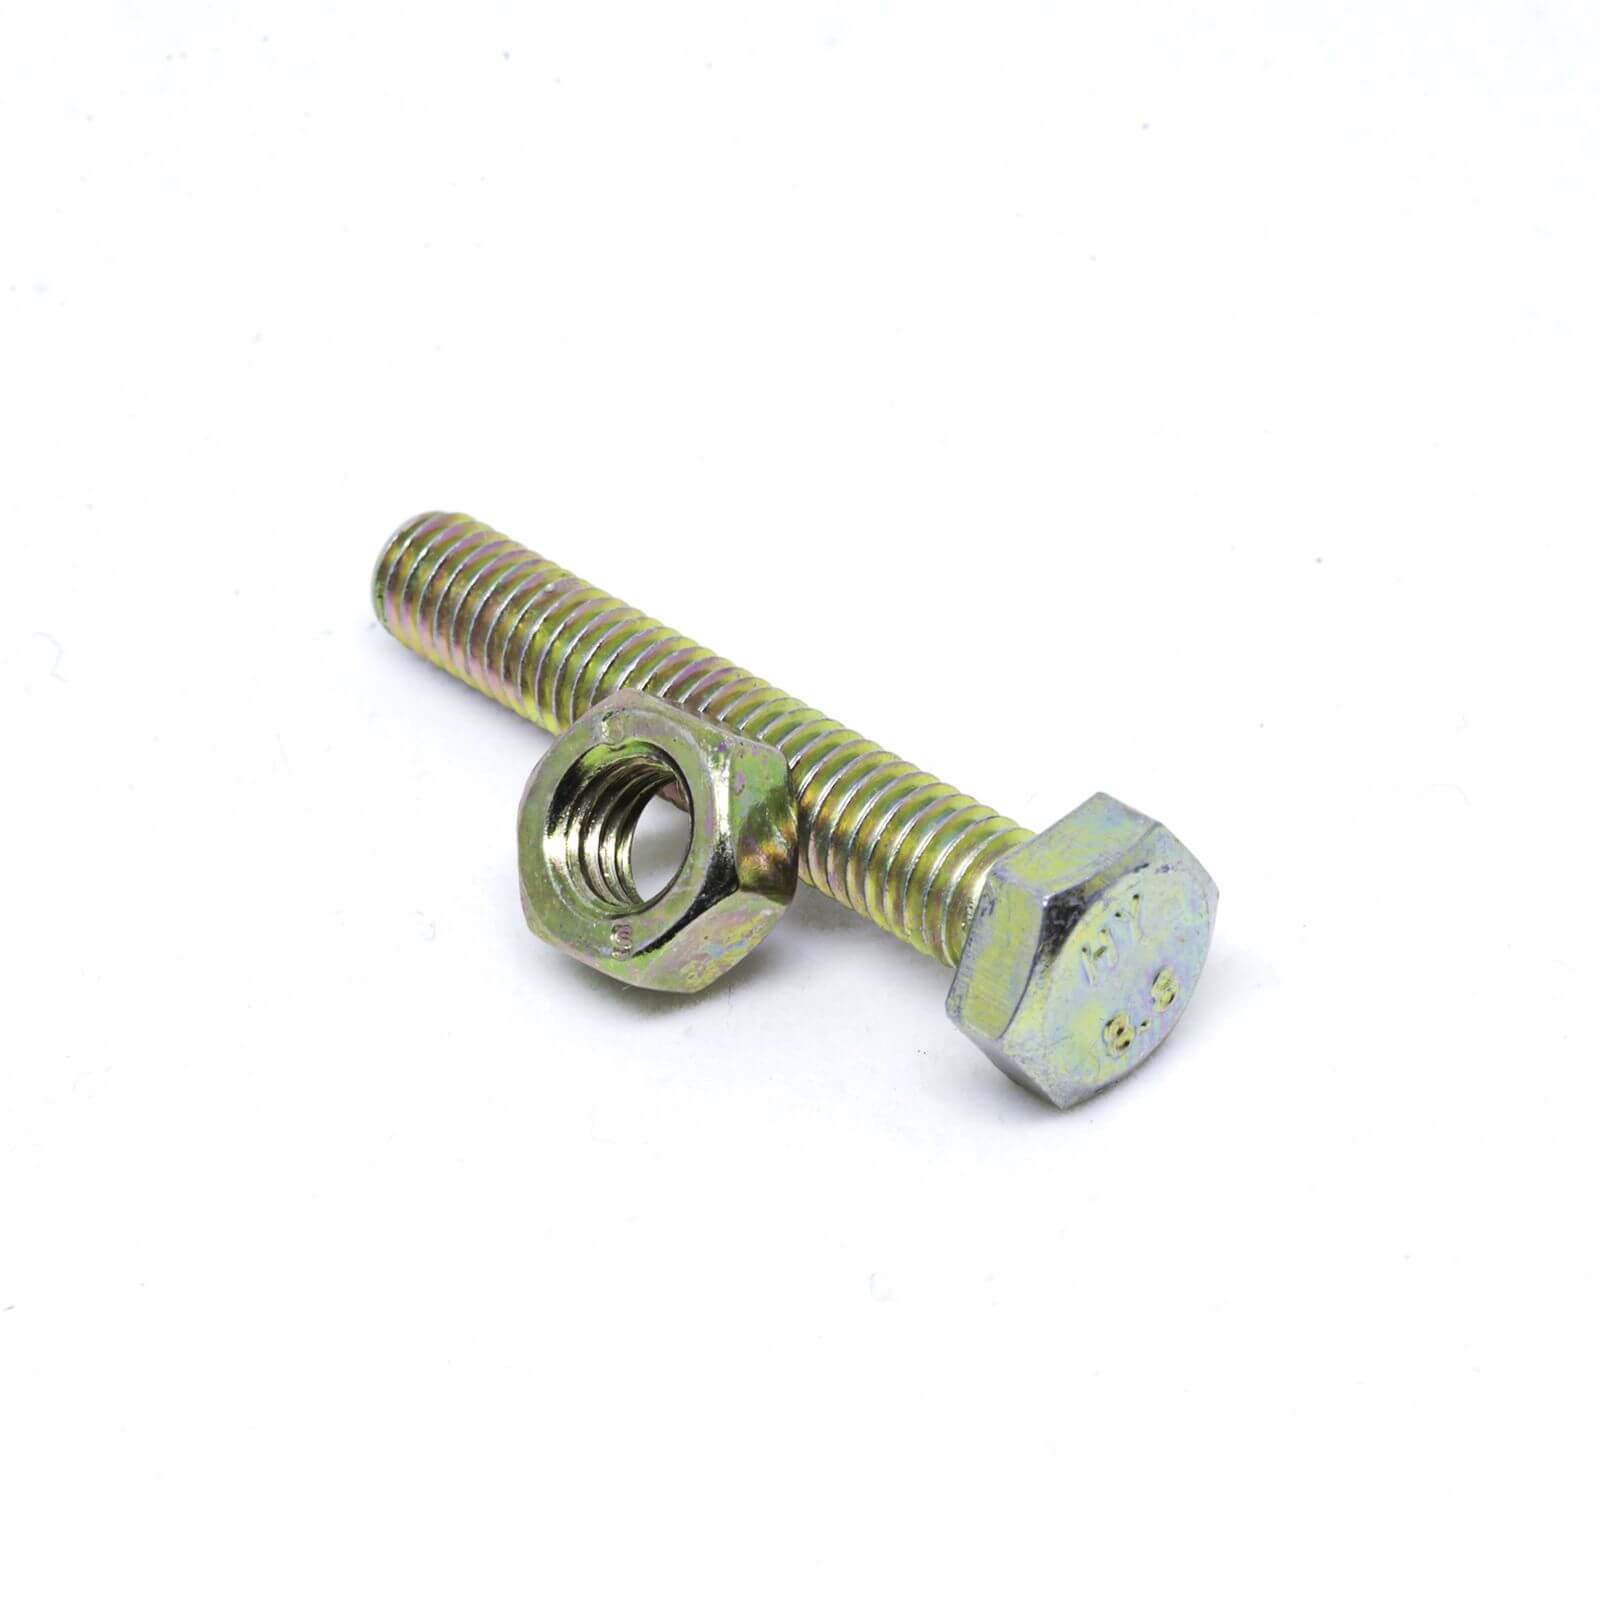 Pinnacle High Tensile Bolts and Nuts - 8 x 40mm - 4 Pack